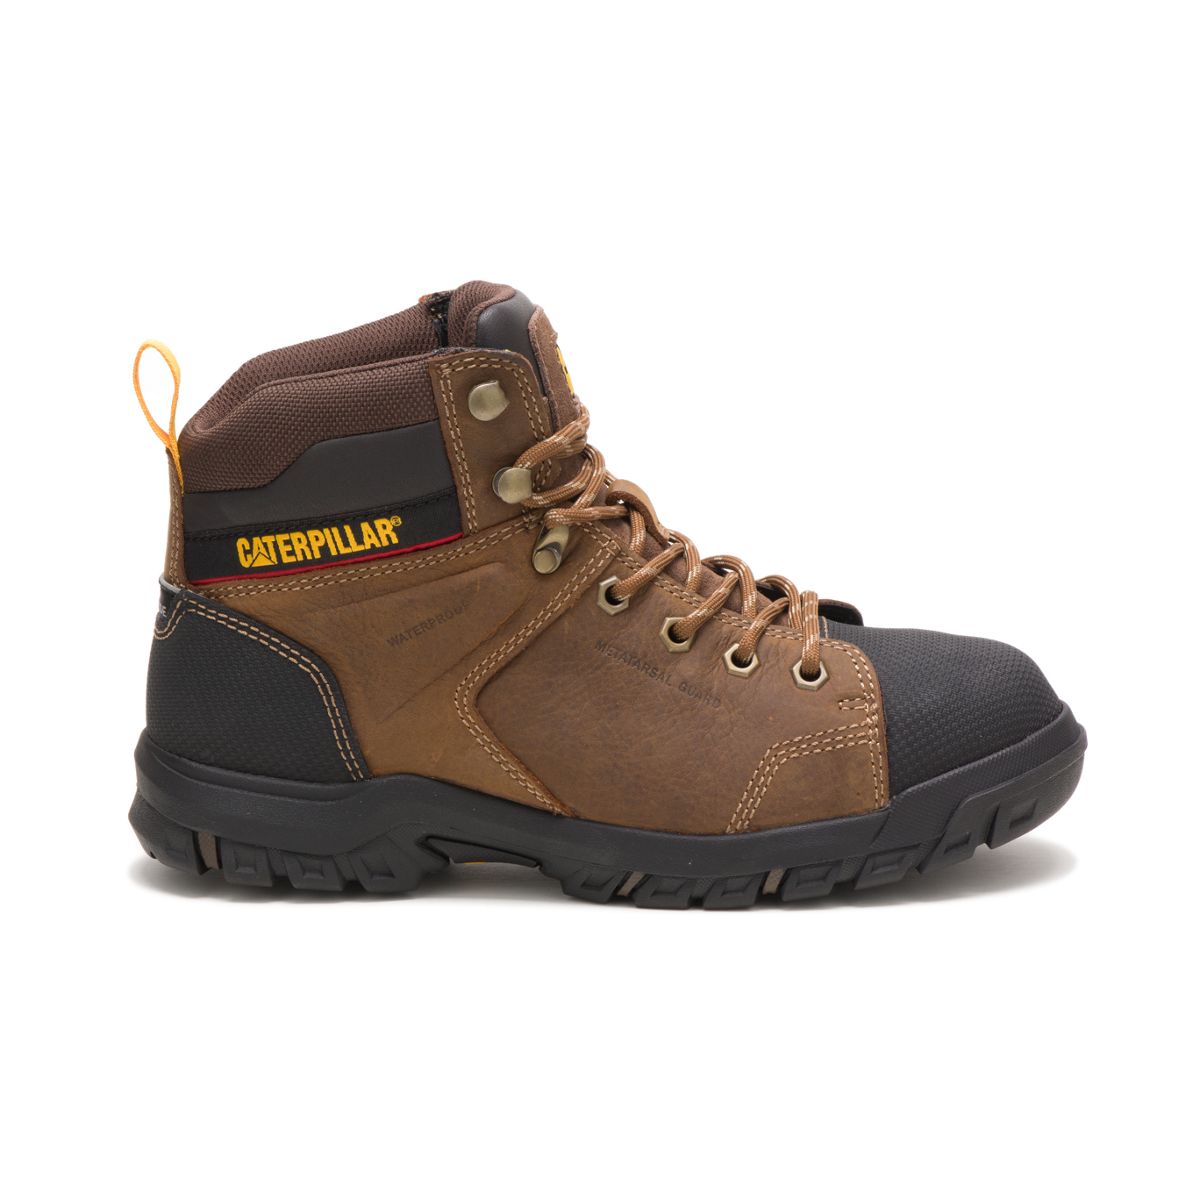 womens composite work boots